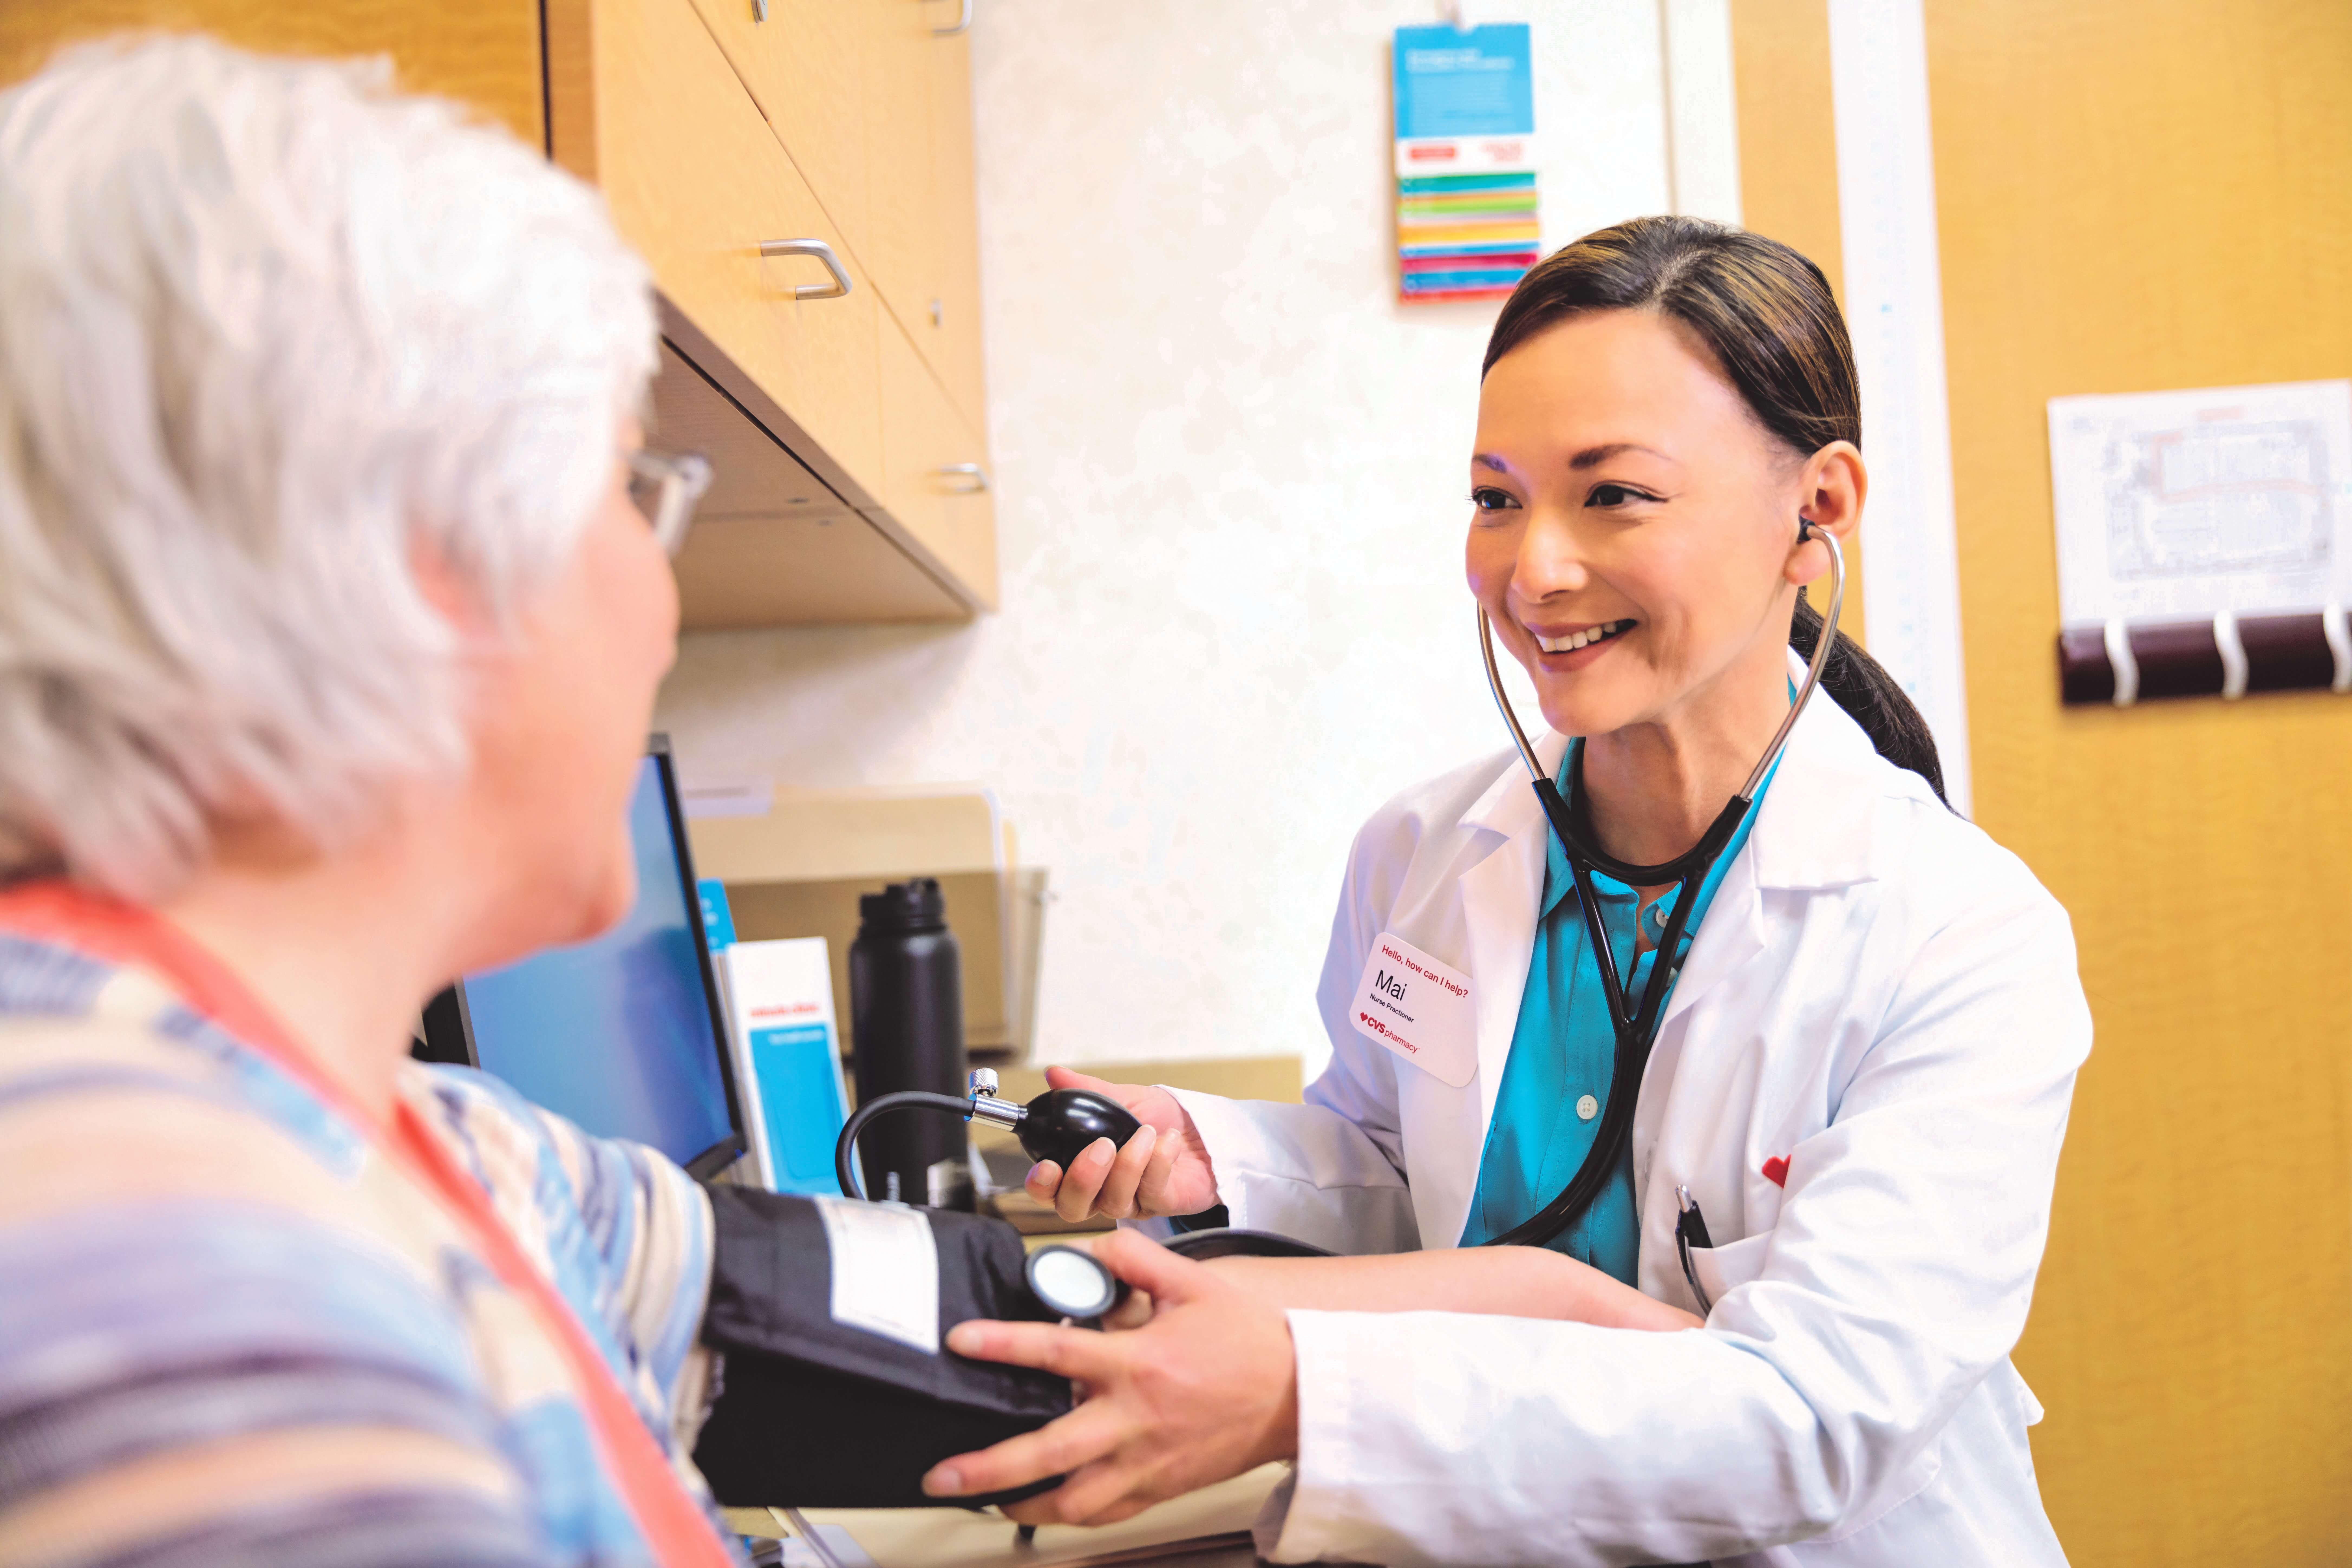 CVS and other clinics can “connect the dots” to help streamline and improve...